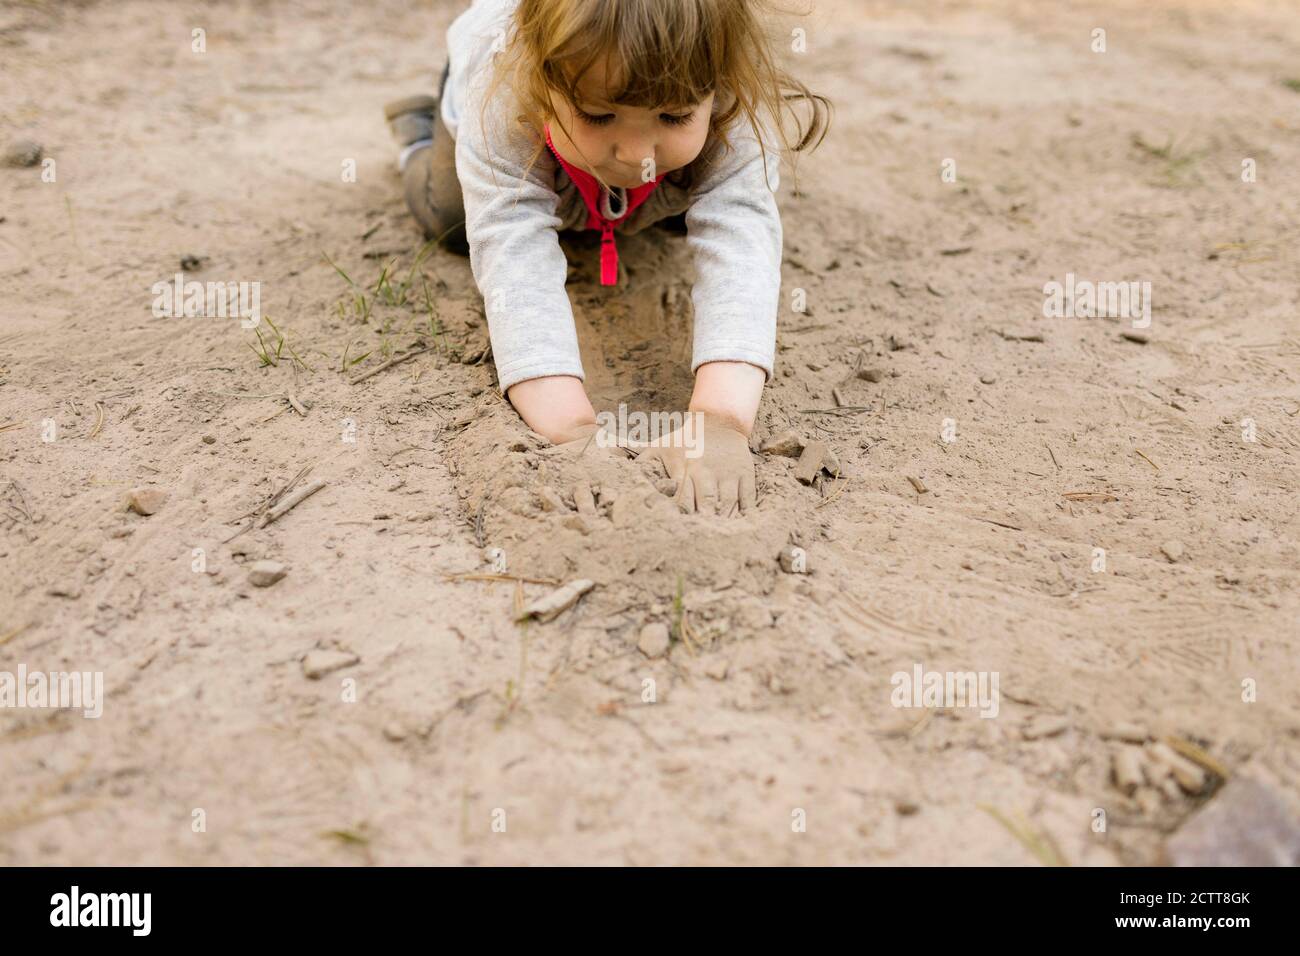 Girl (2-3) playing in sand, Wasatch Cache National Forest Stock Photo